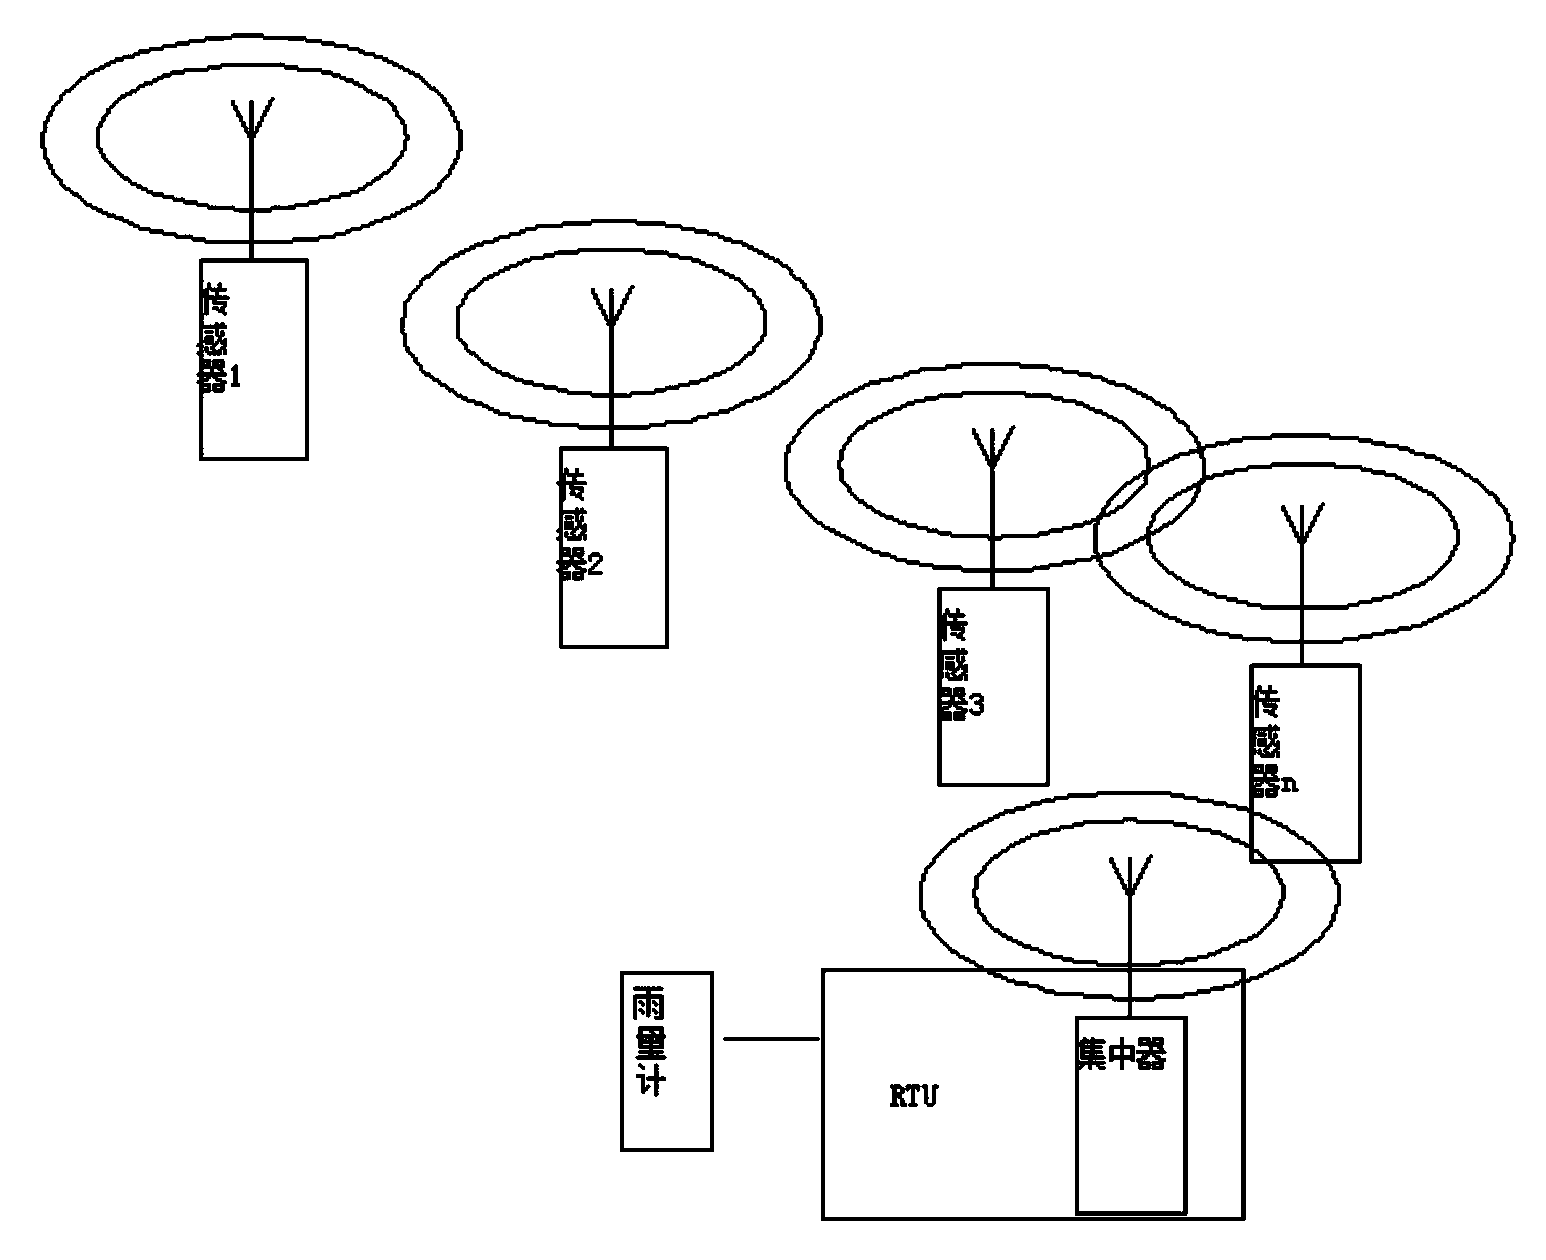 Wireless self-networking group detection based mudslide early warning sensing device, system and method